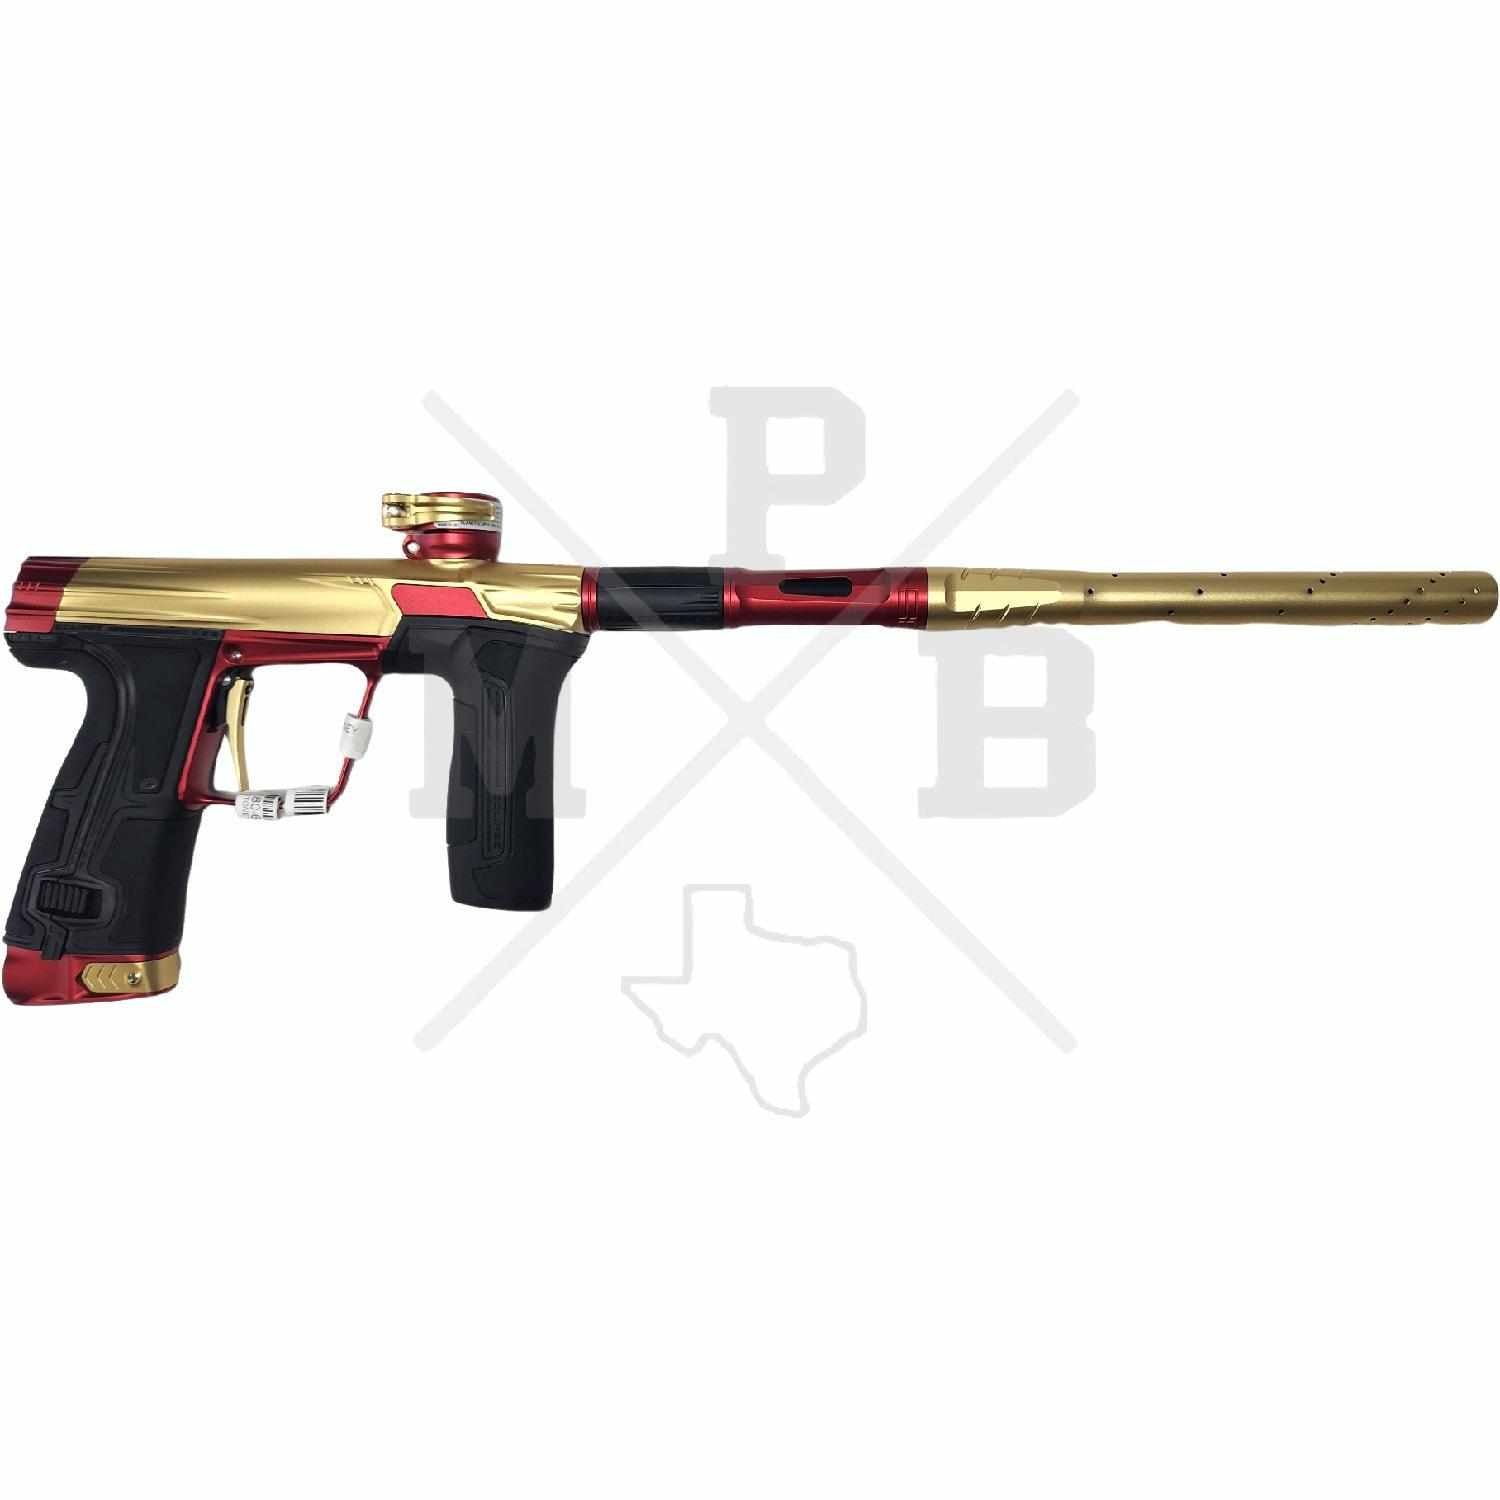 Planet Eclipse CS3 - Gold/Red